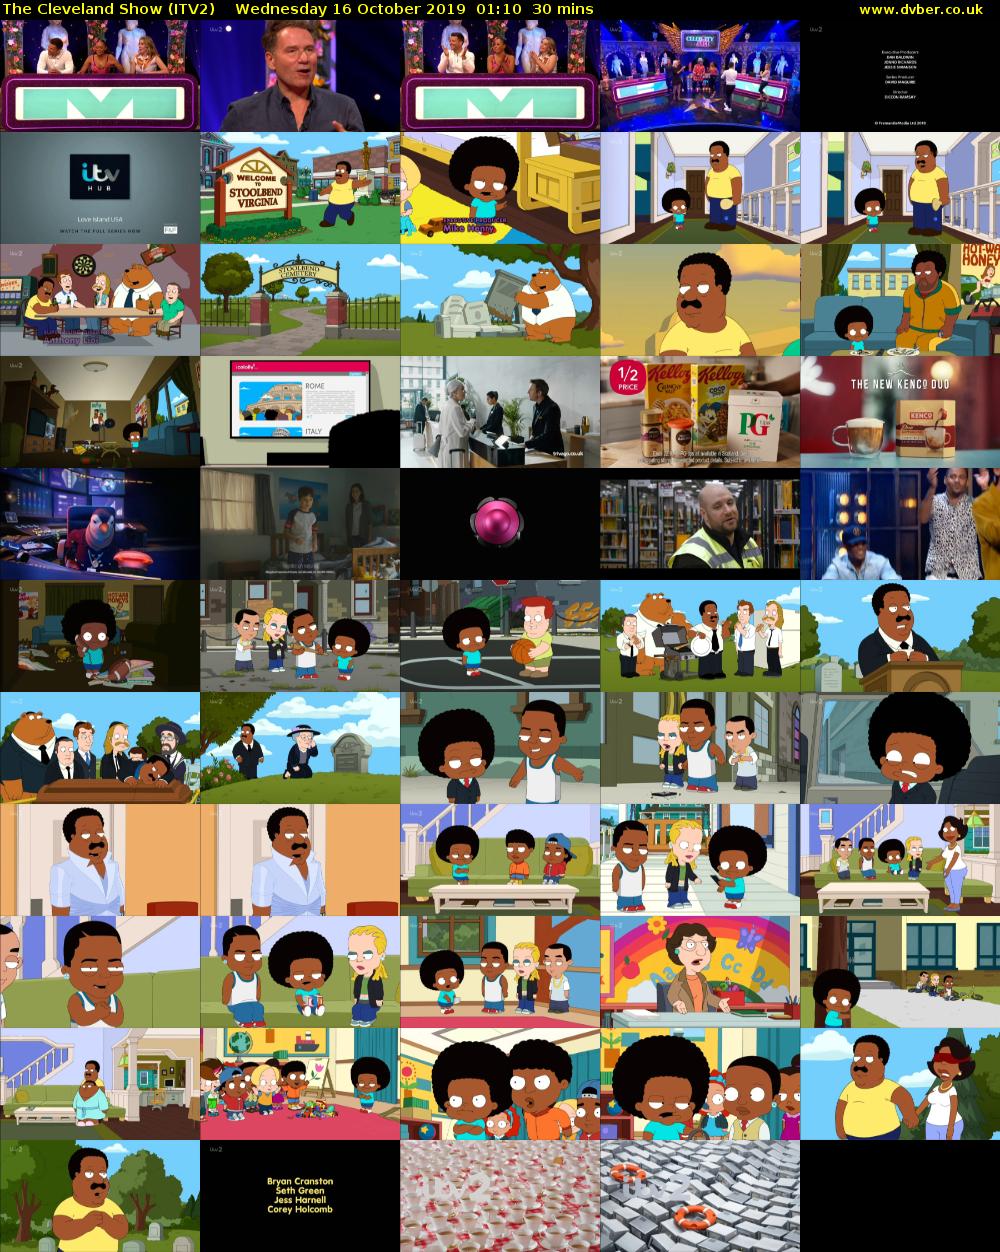 The Cleveland Show (ITV2) Wednesday 16 October 2019 01:10 - 01:40